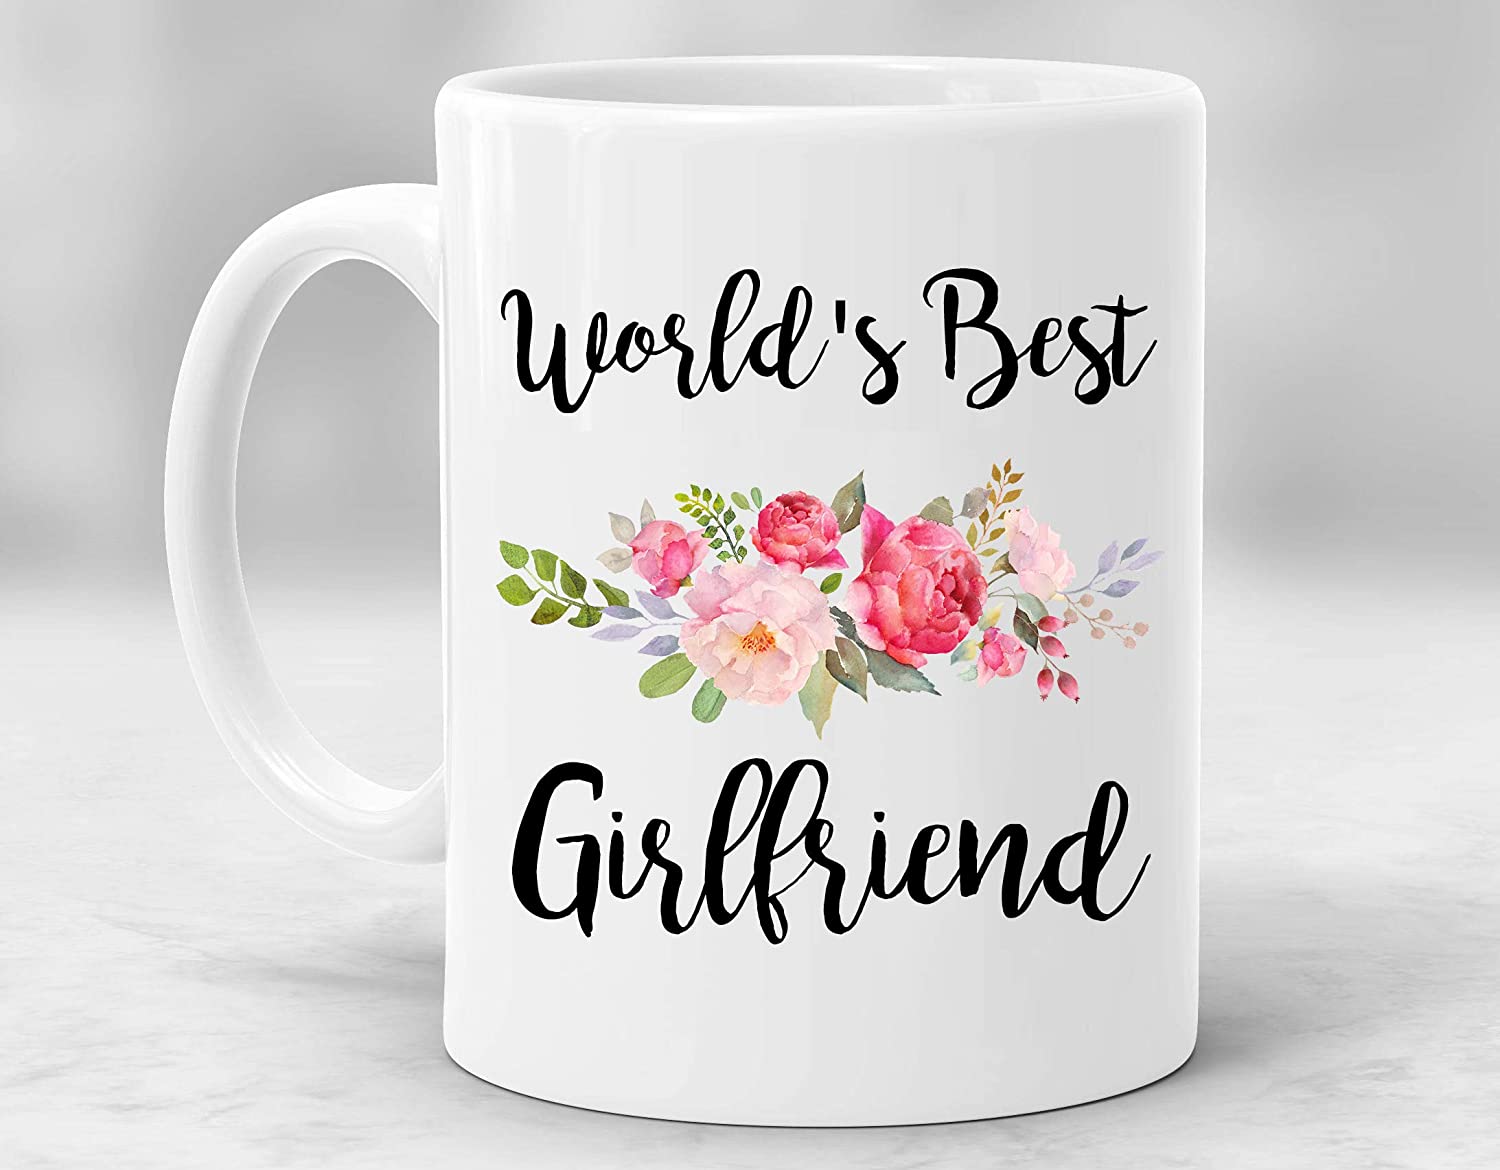 cool stuff to get your girlfriend